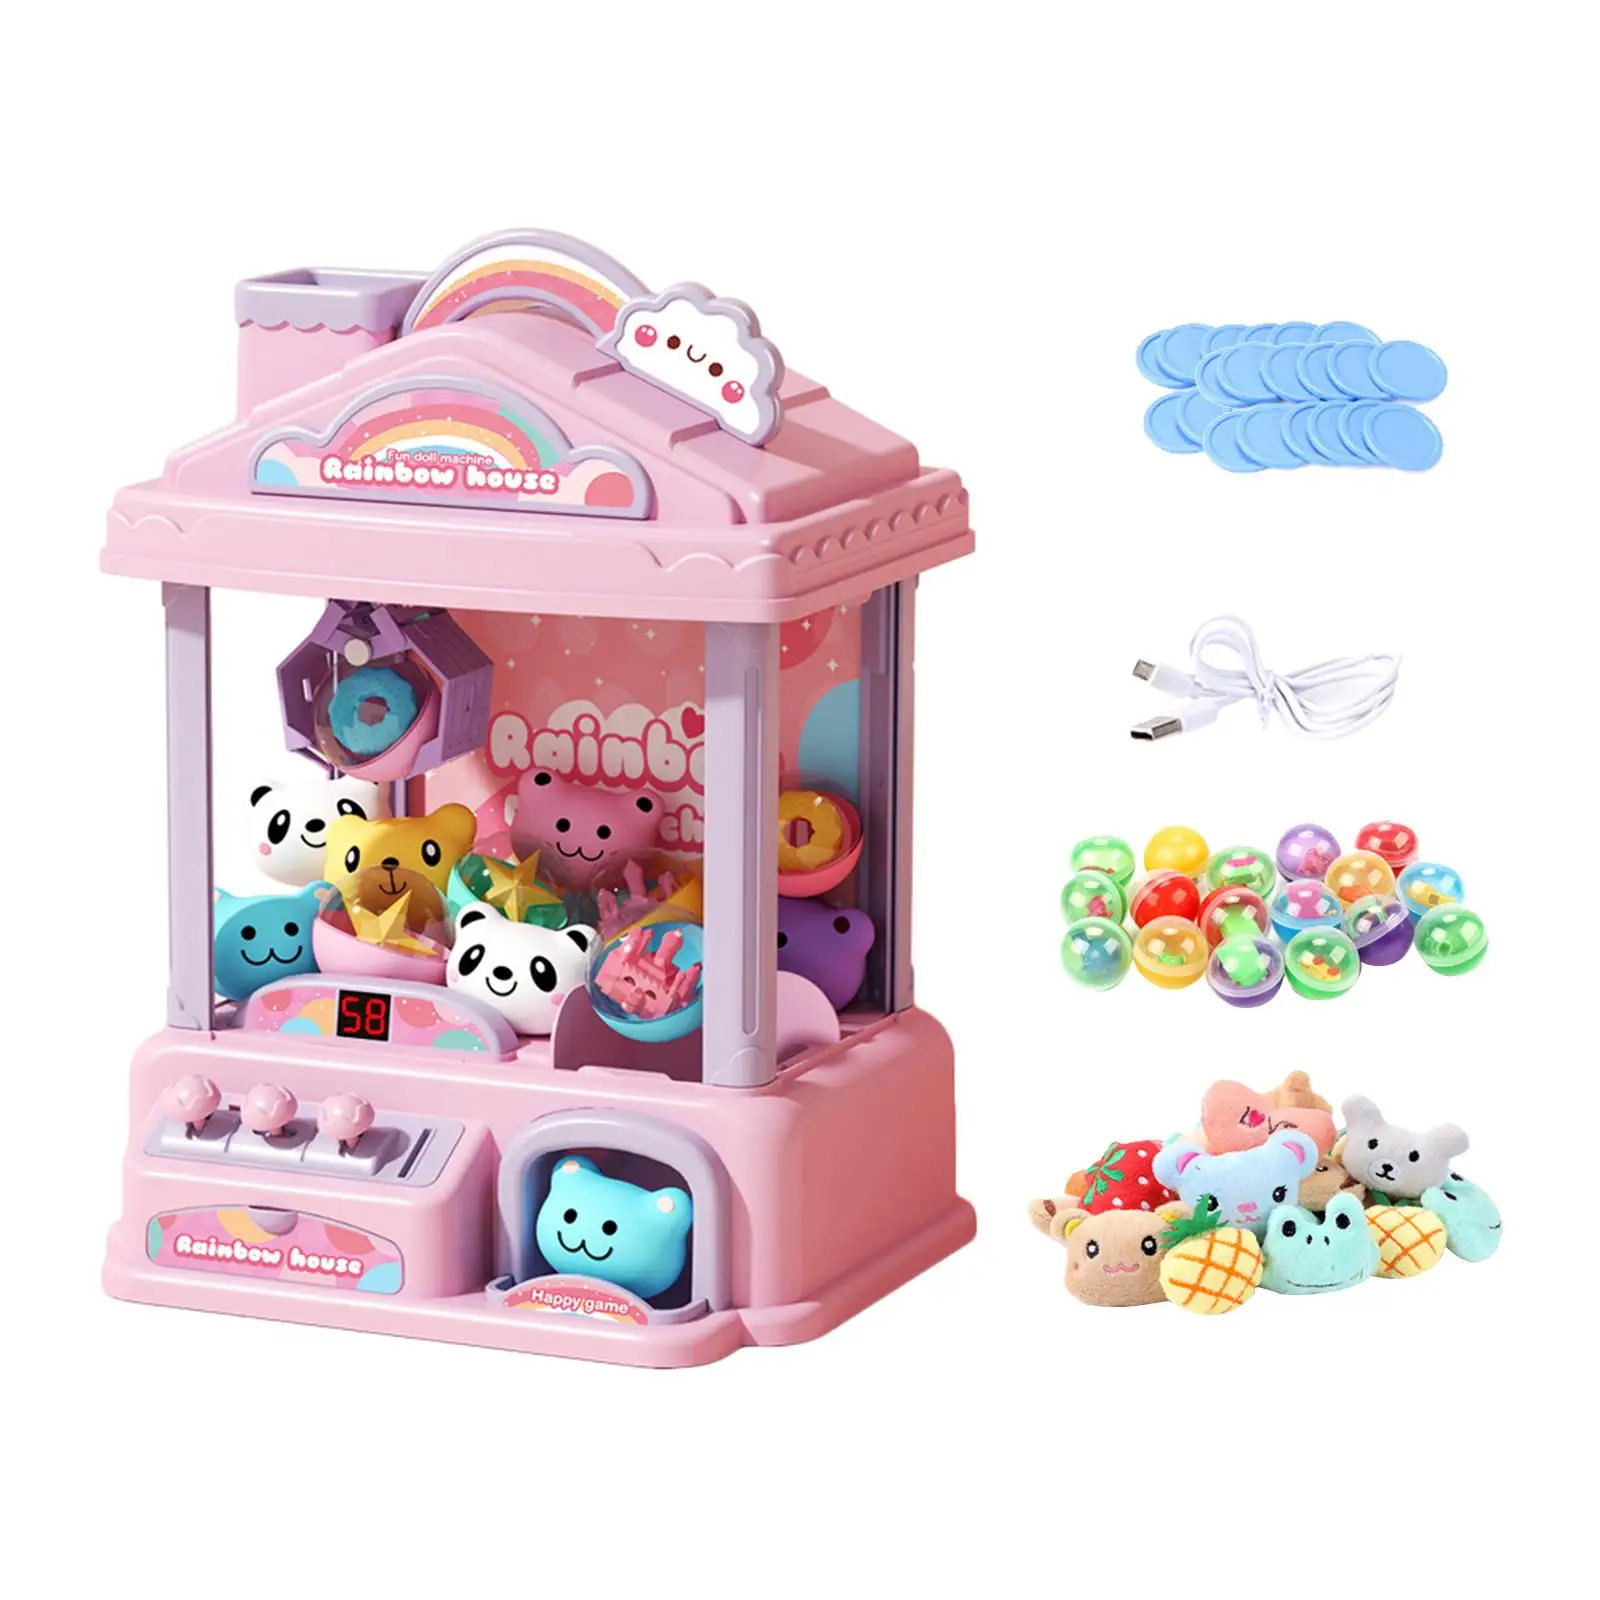 Claw Machine Mini Vending Machine with 20 Mini Plush Animals for Kid Toddler Boys Girls 3-6 Years Old Best Gifts